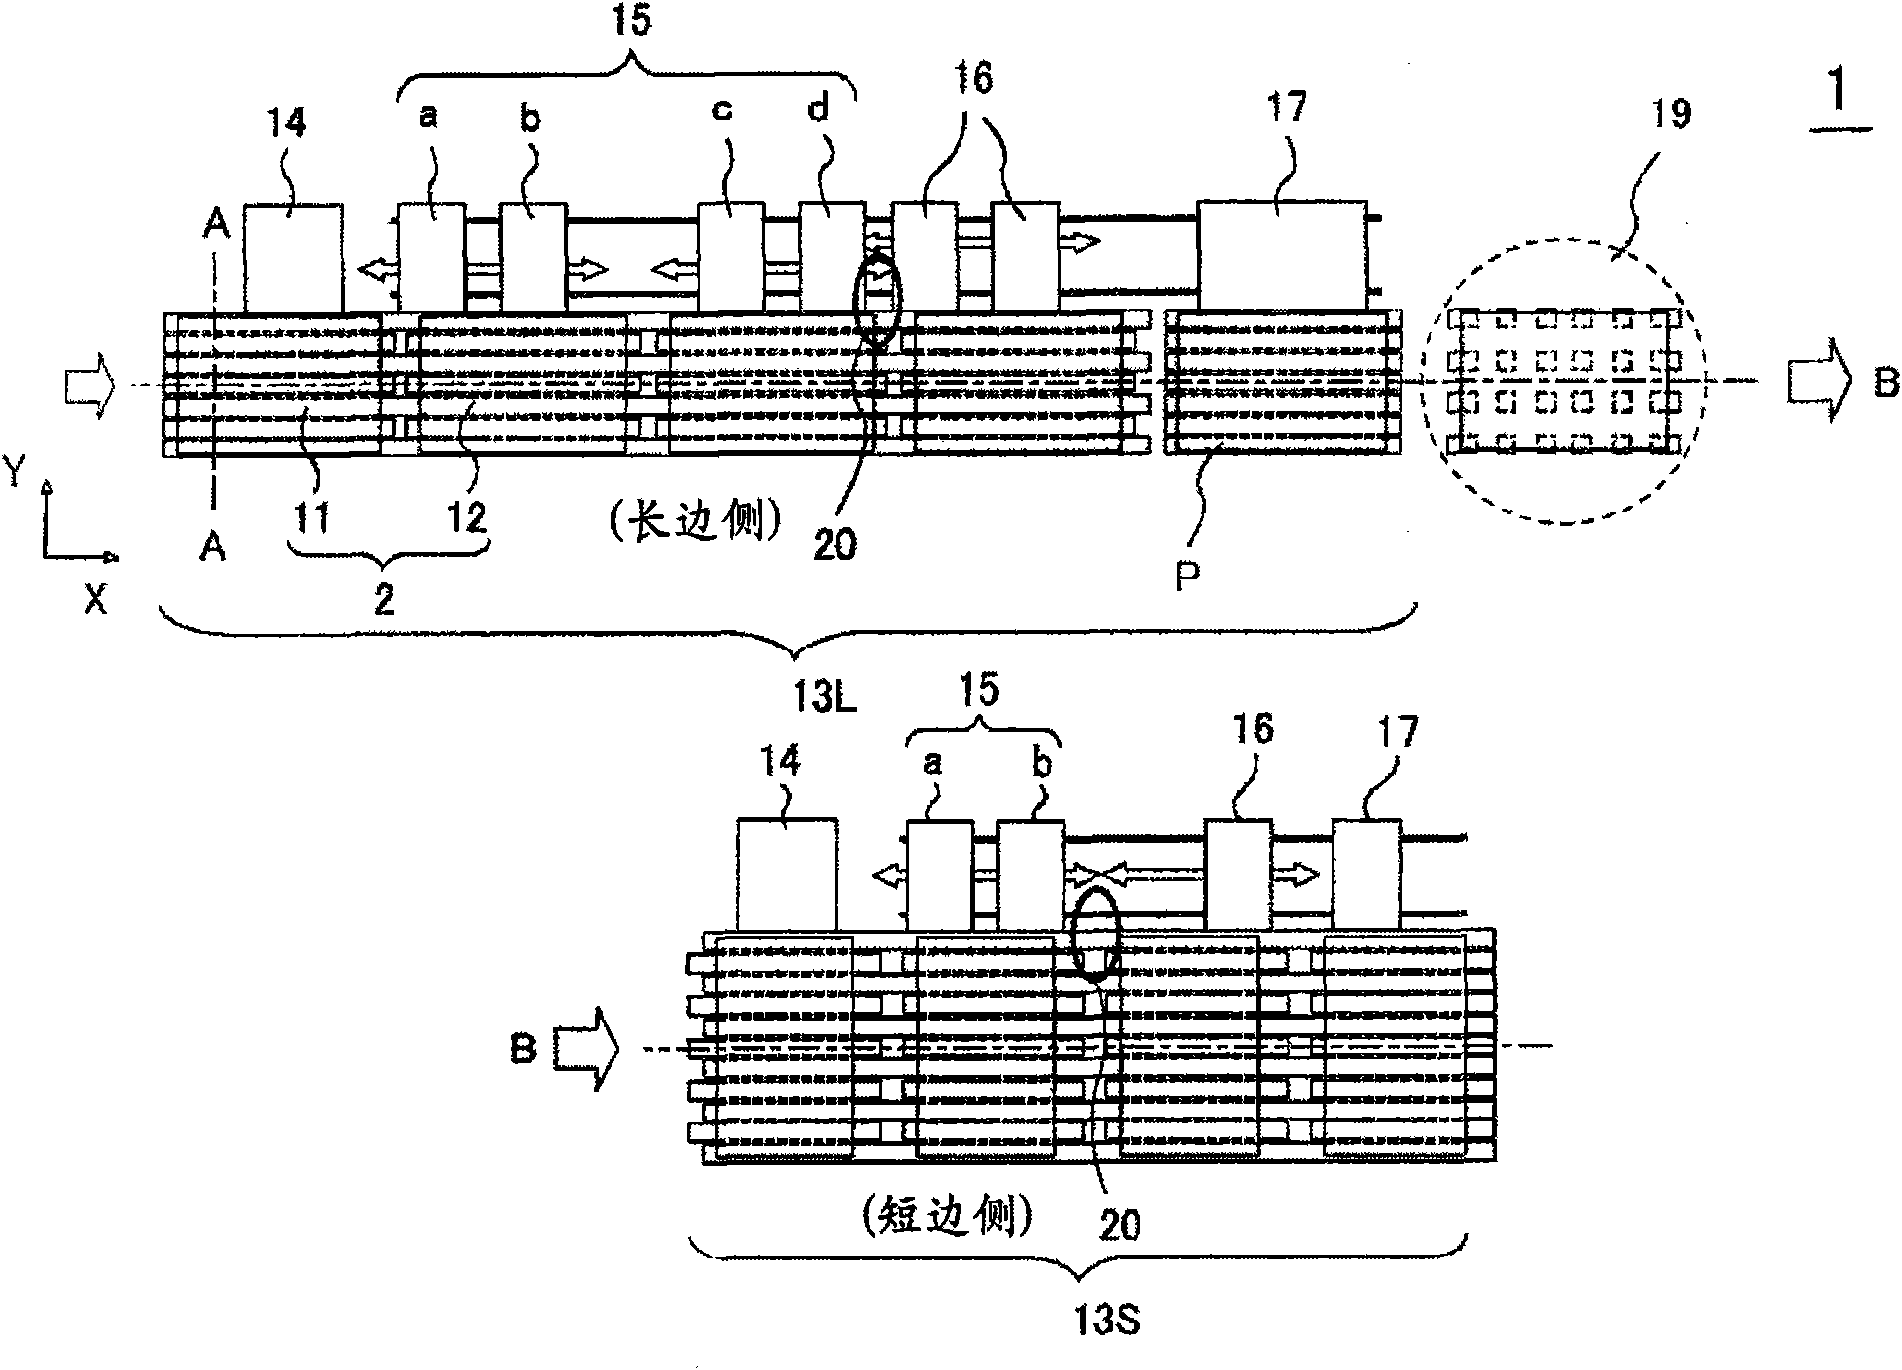 Processing apparatus, method for detecting ACF sticking state or display substrate assembly line